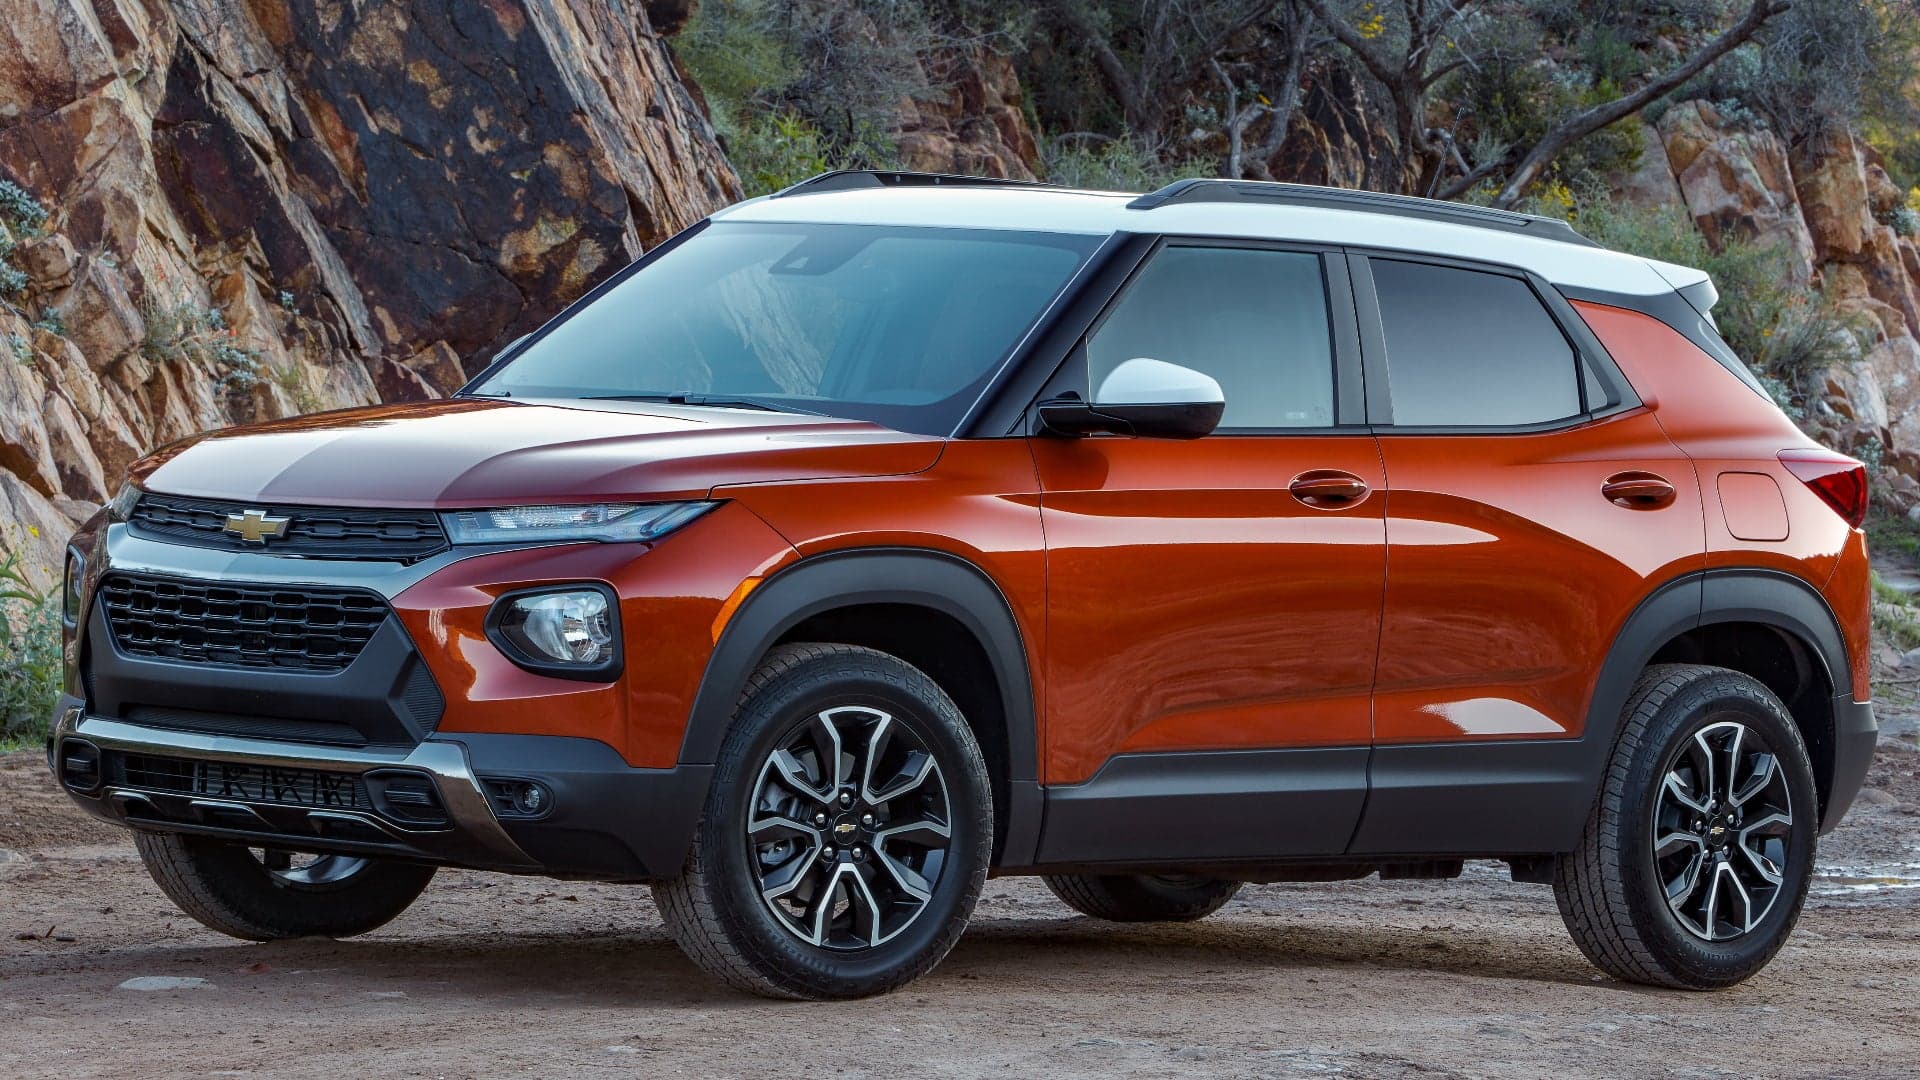 The 2021 Chevy Trailblazer Spends the Shortest Time of Any Car on Dealership Lots